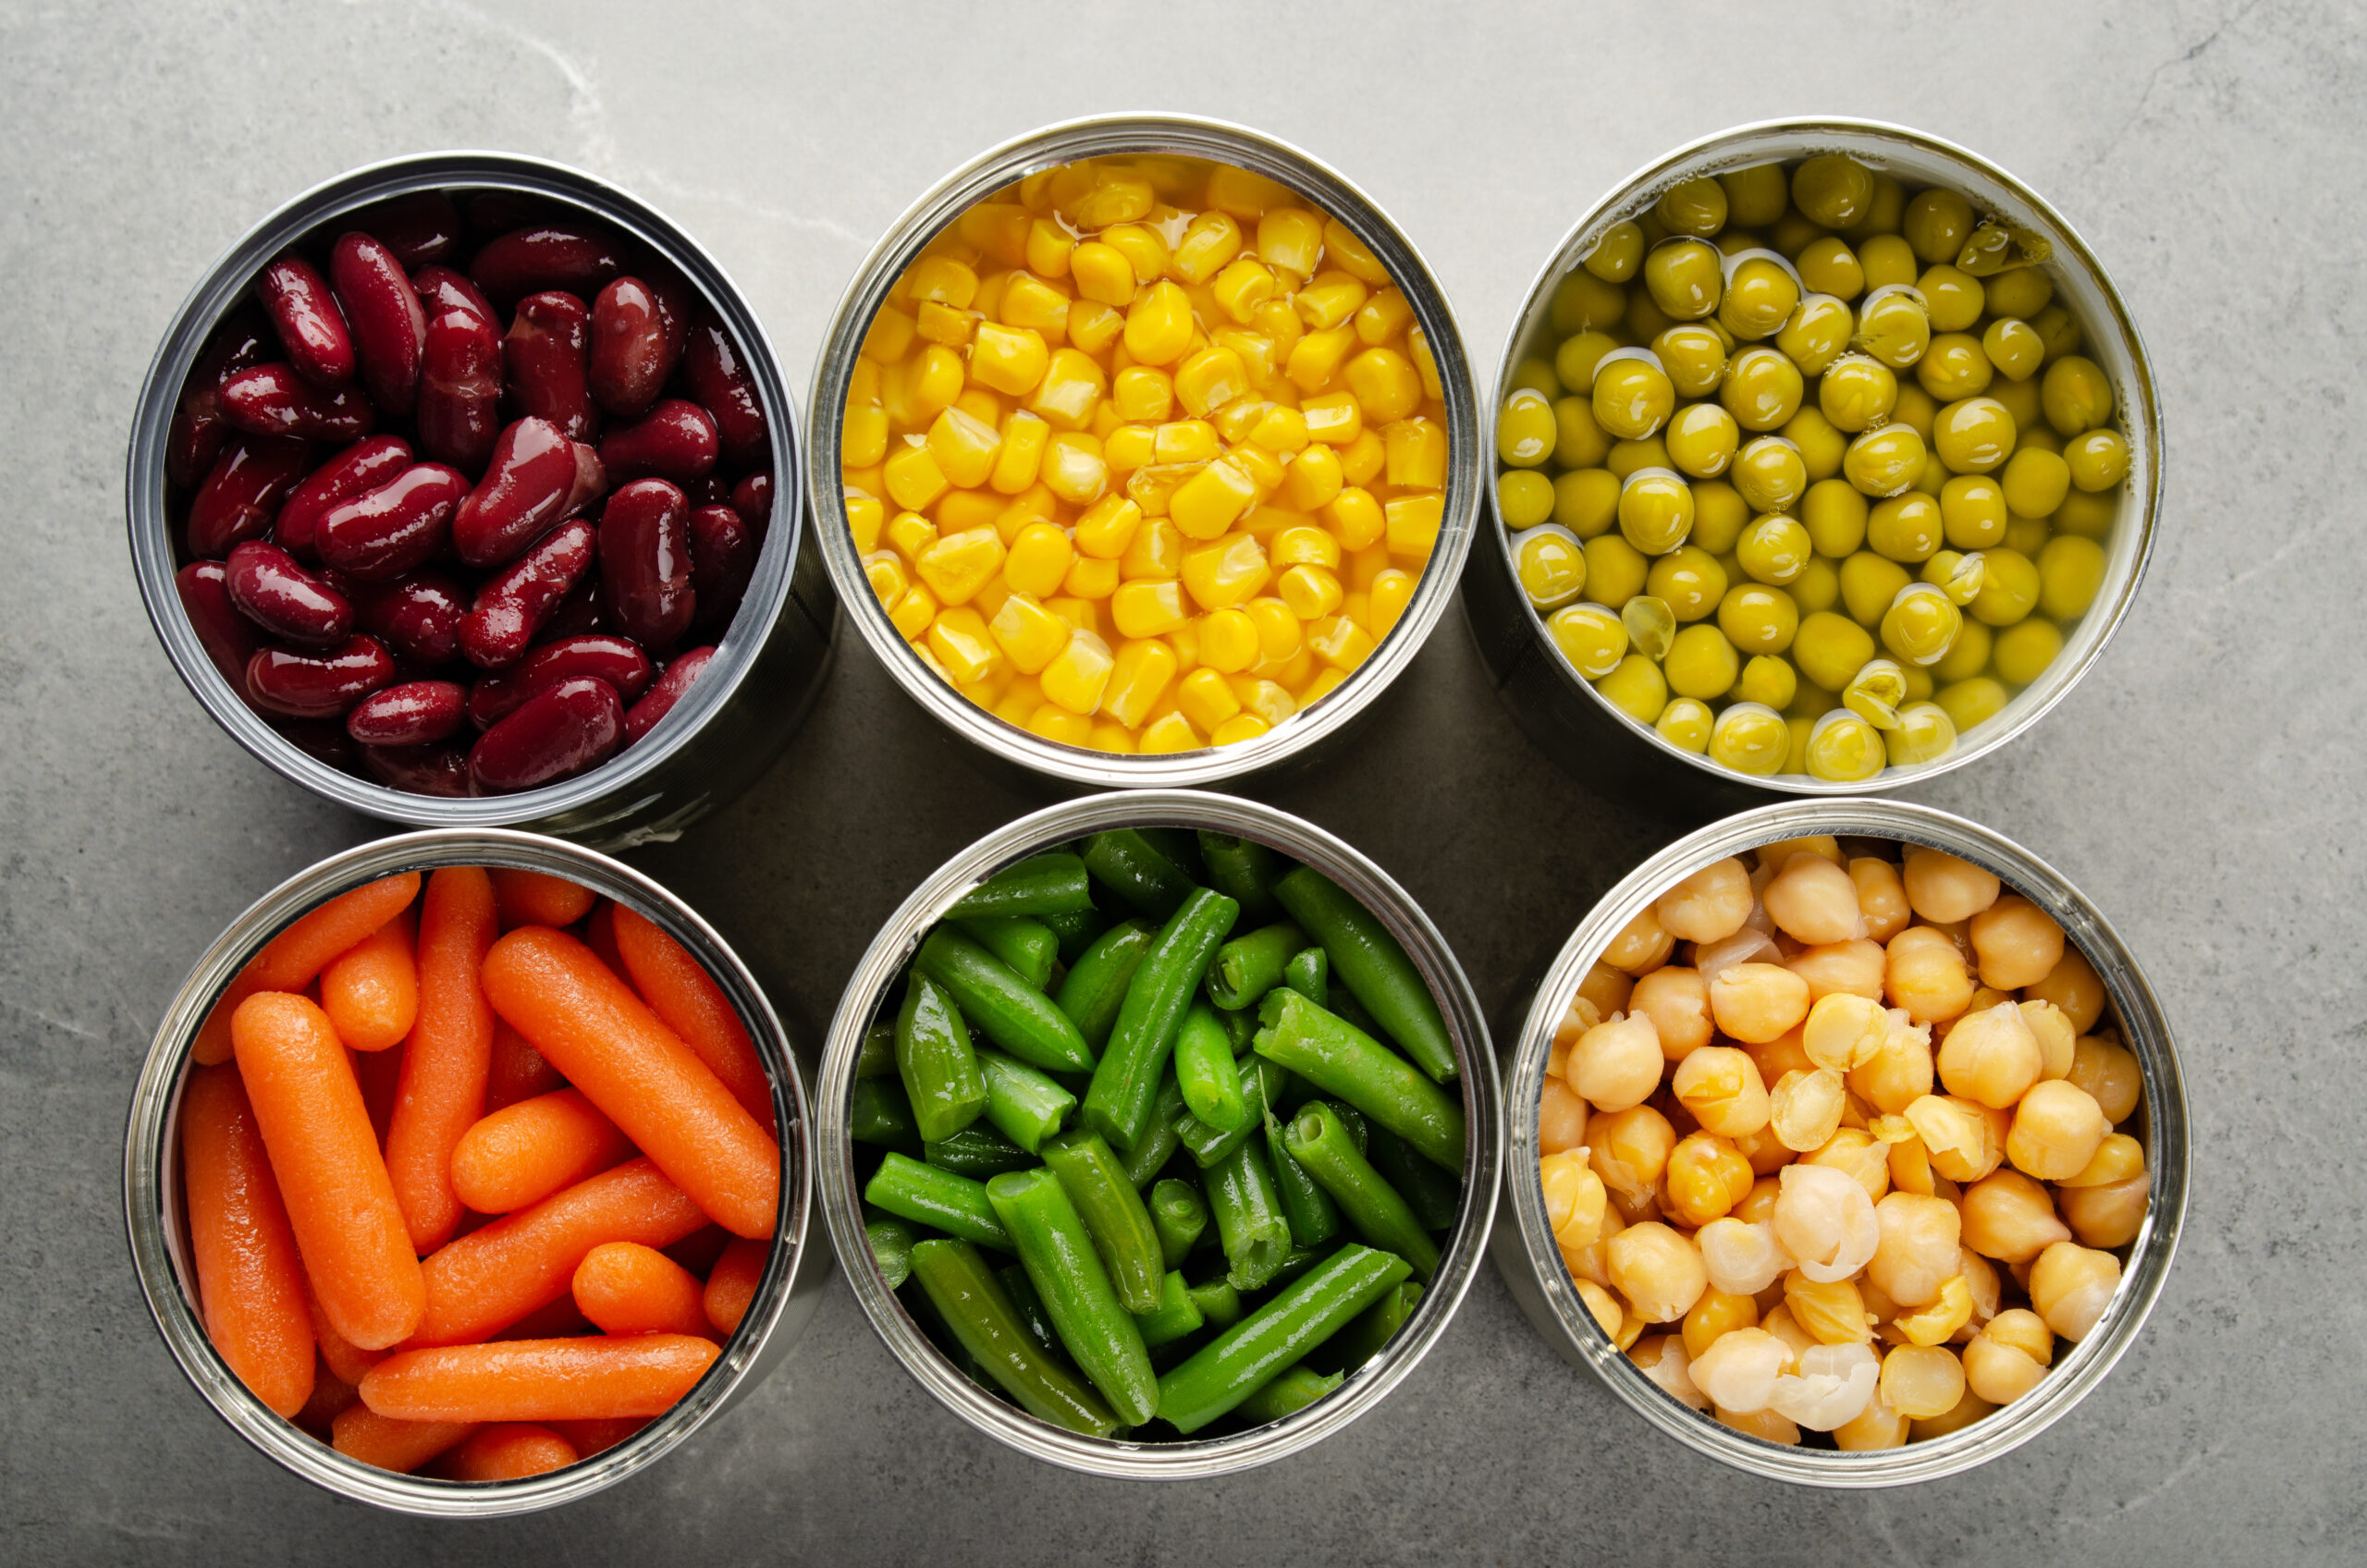 8 Danger Sides of Canned Foods That Harm Your Health